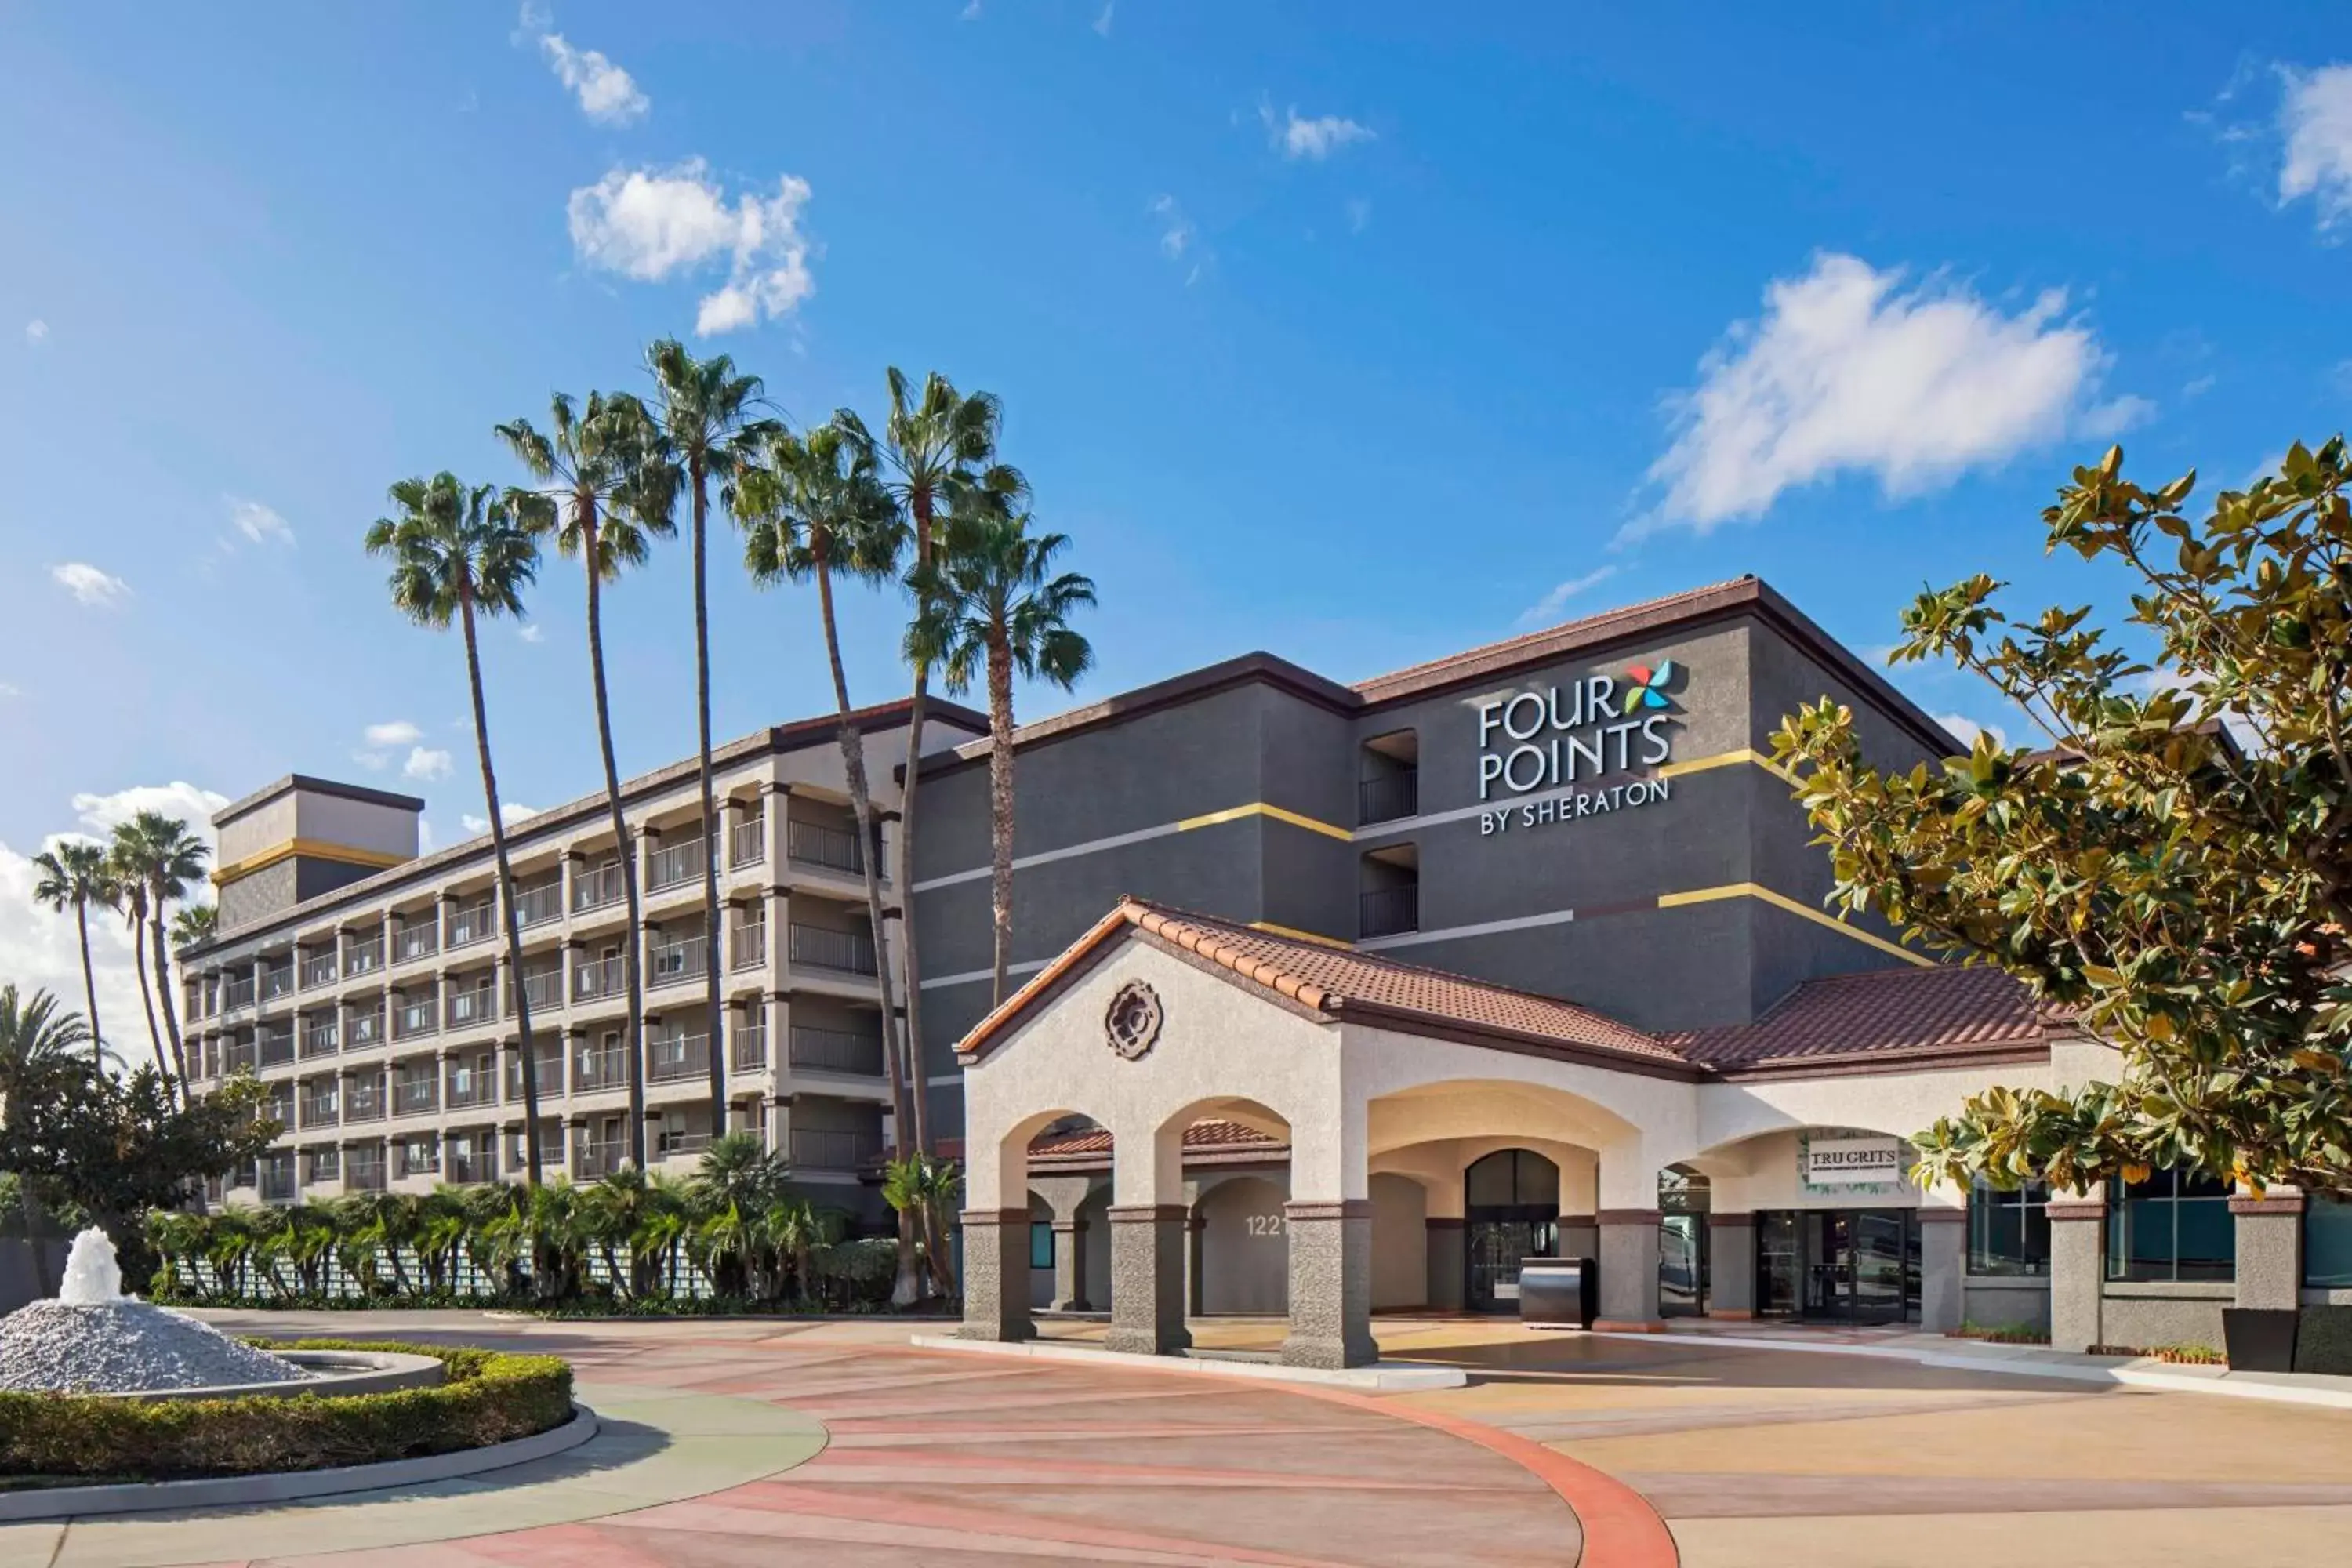 Property Building in Four Points by Sheraton Anaheim